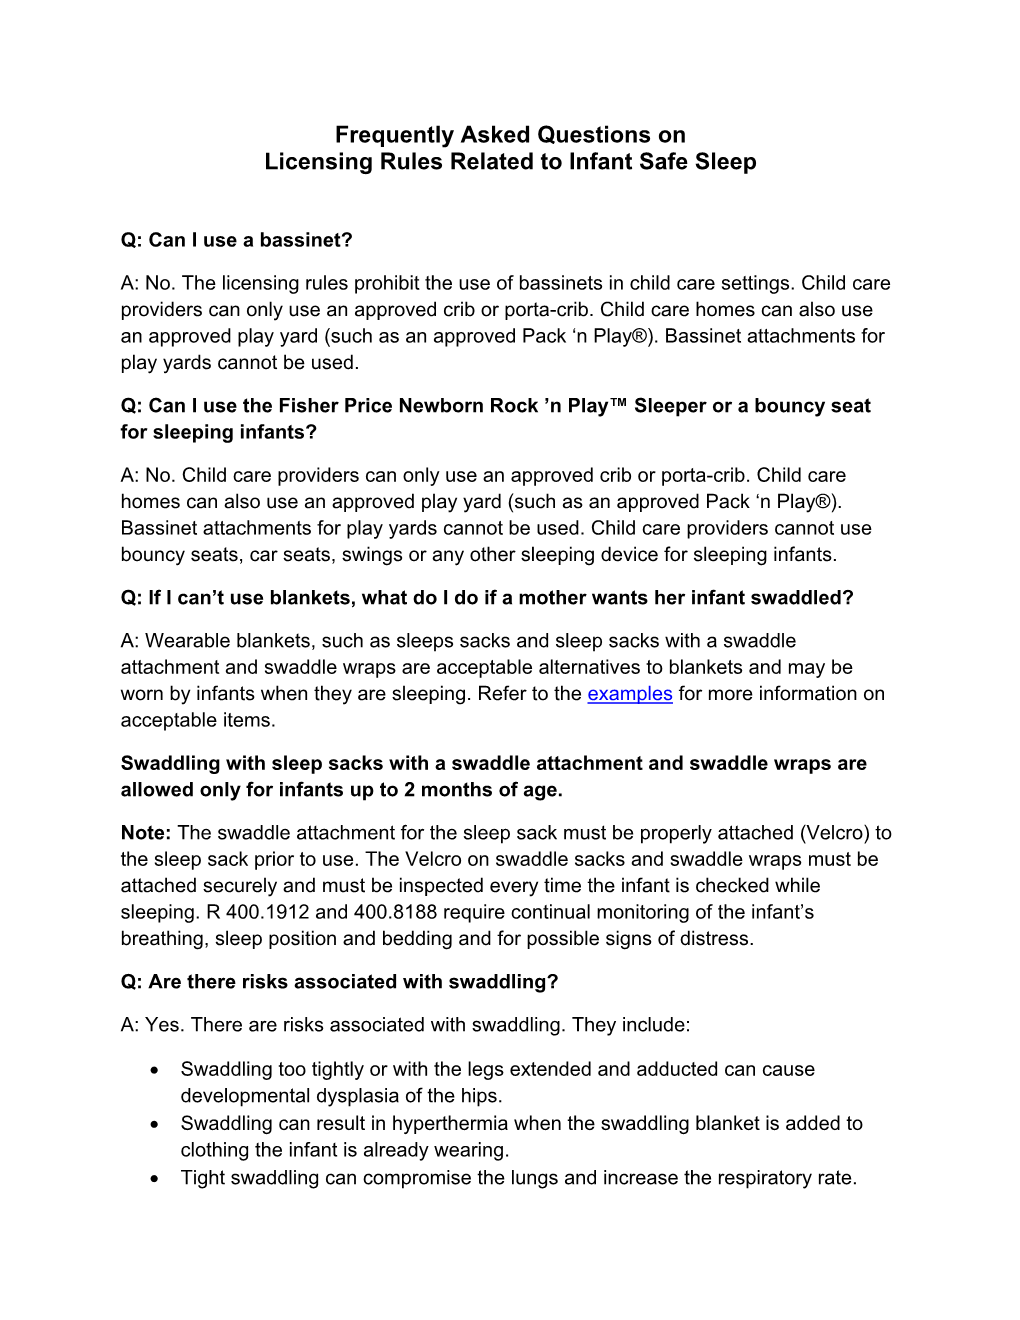 Frequently Asked Questions on Licensing Rules Related to Infant Safe Sleep